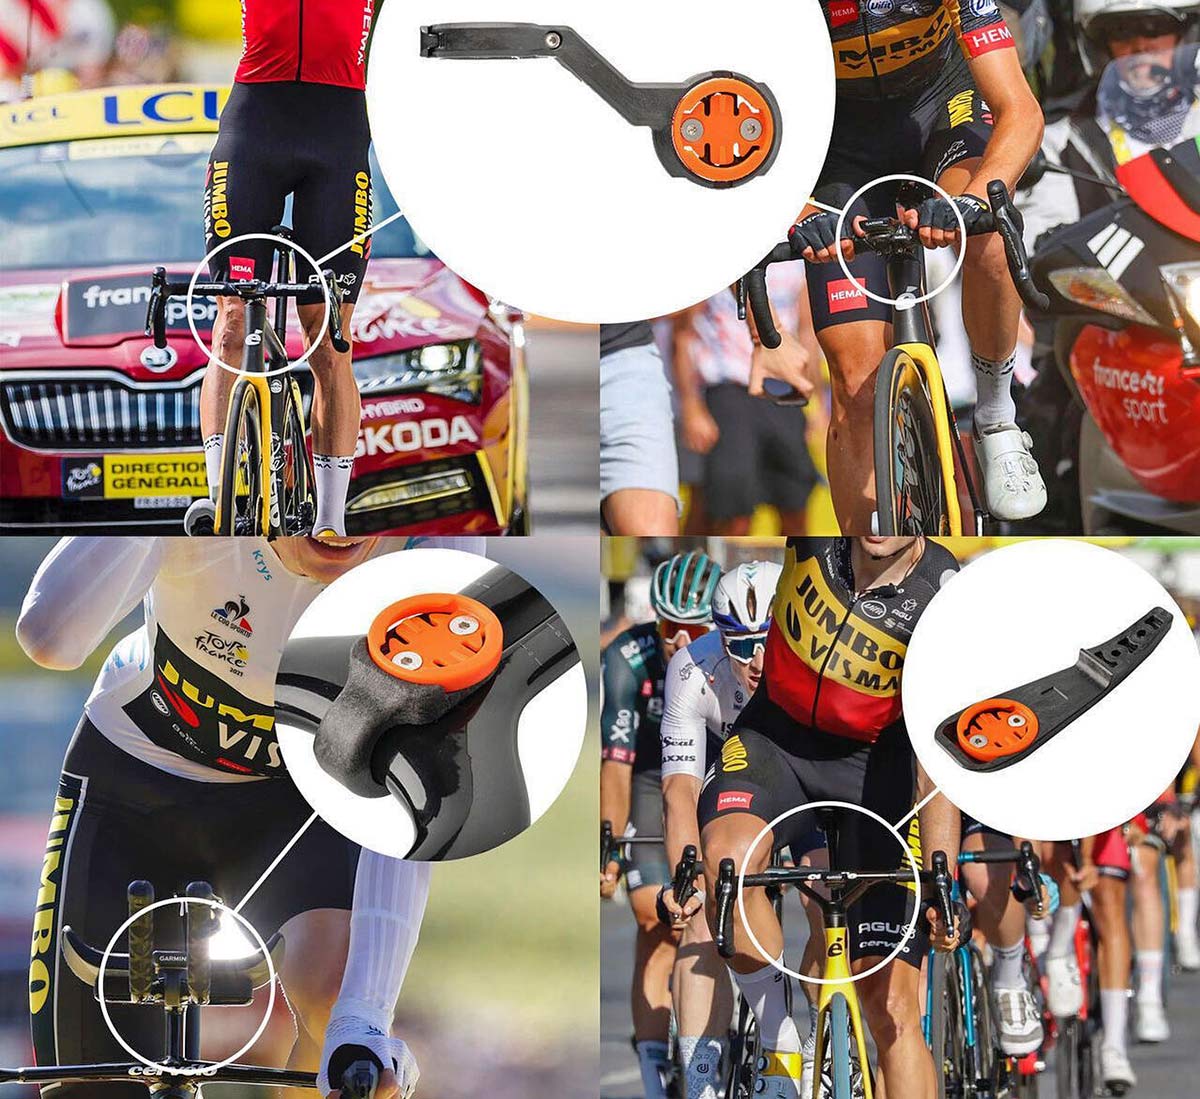 UCI Cycling governing bodies to make bike bells compulsory in 2023, Team Jumbo-Visma Close The Gap HideMyBell mounts, in racing